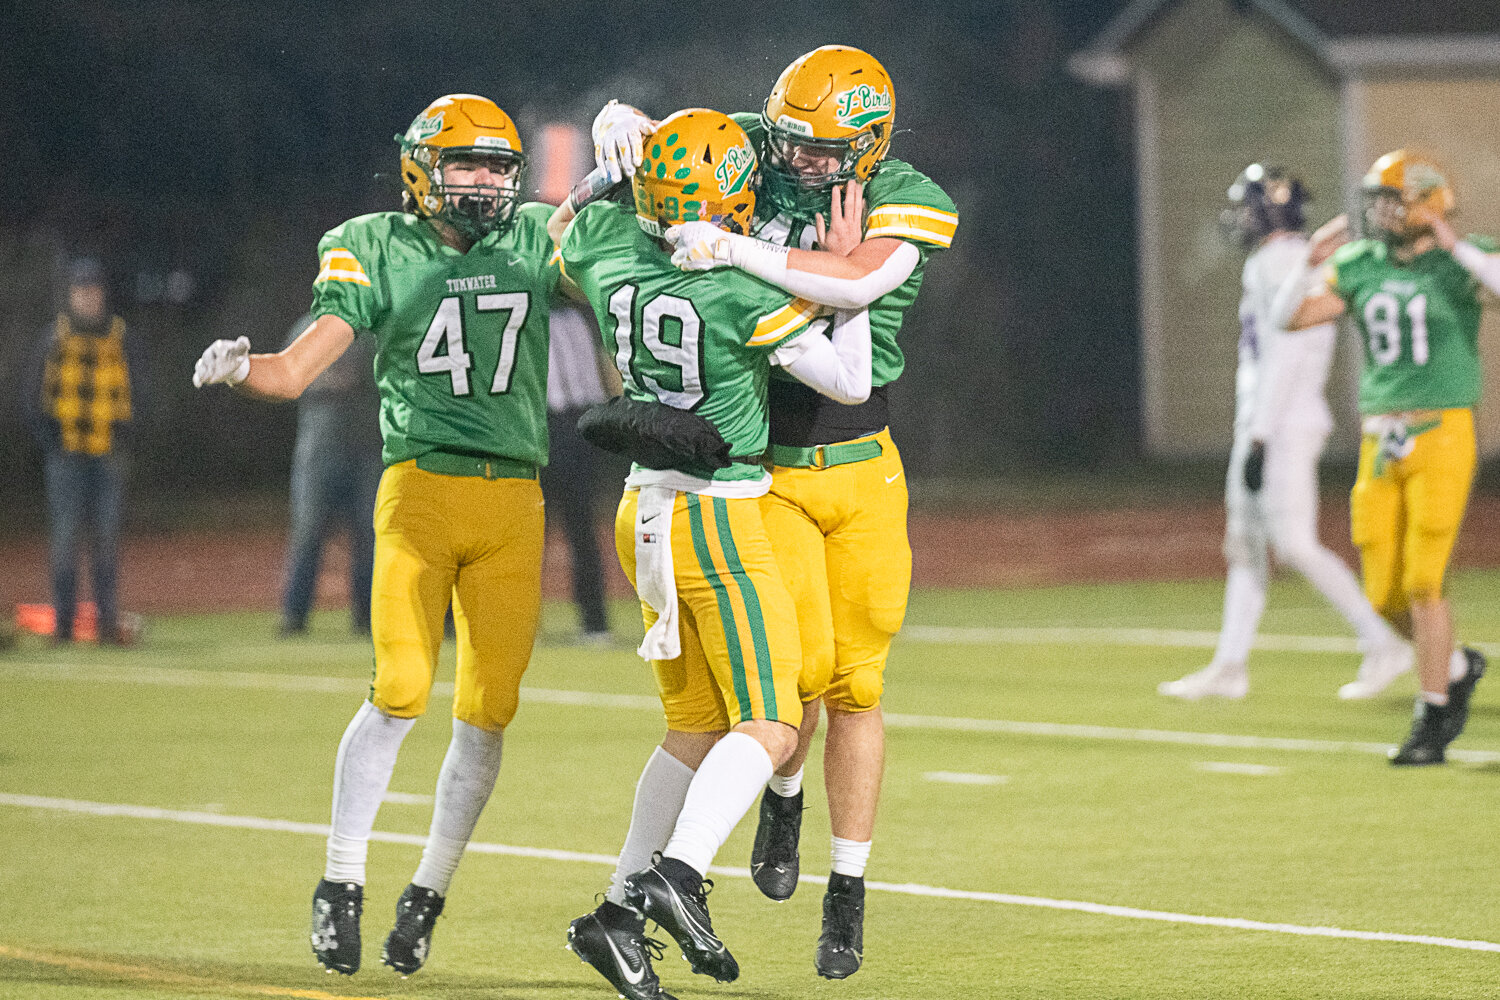 Mathias Rodriguez (47), Ethan Kastner (19) and Jacob Dillon celebrate after the final kneel-down of Tumwater's 19-17 win over North Kitsap in the 2A state semifinals on Nov. 25.